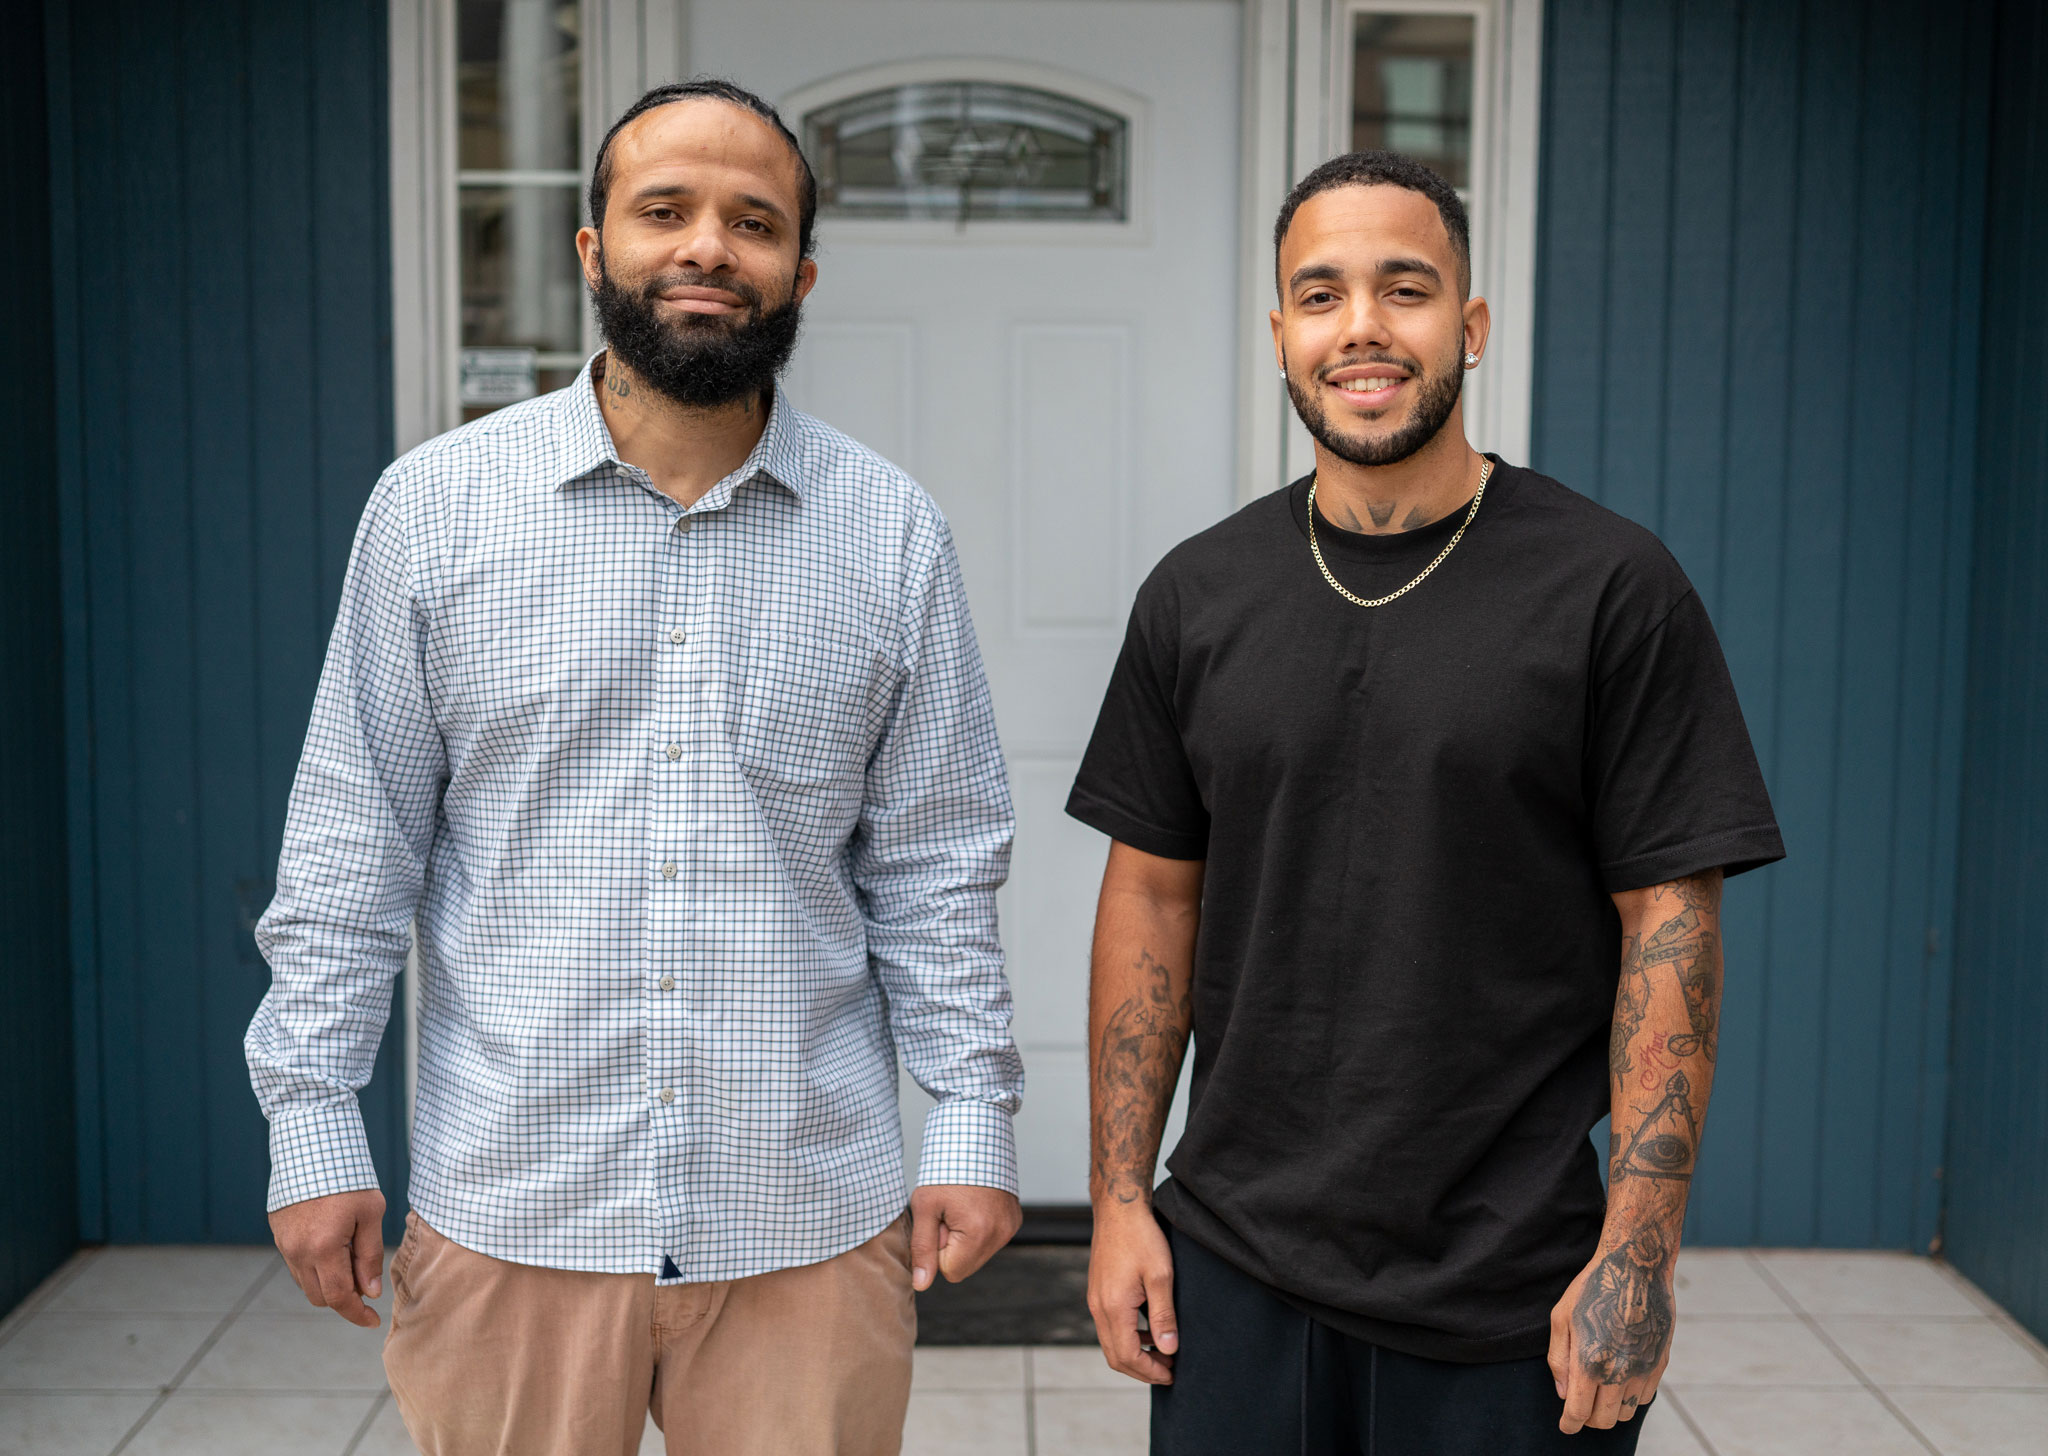 two men stand in front of a teal blue house while smiling proudly.